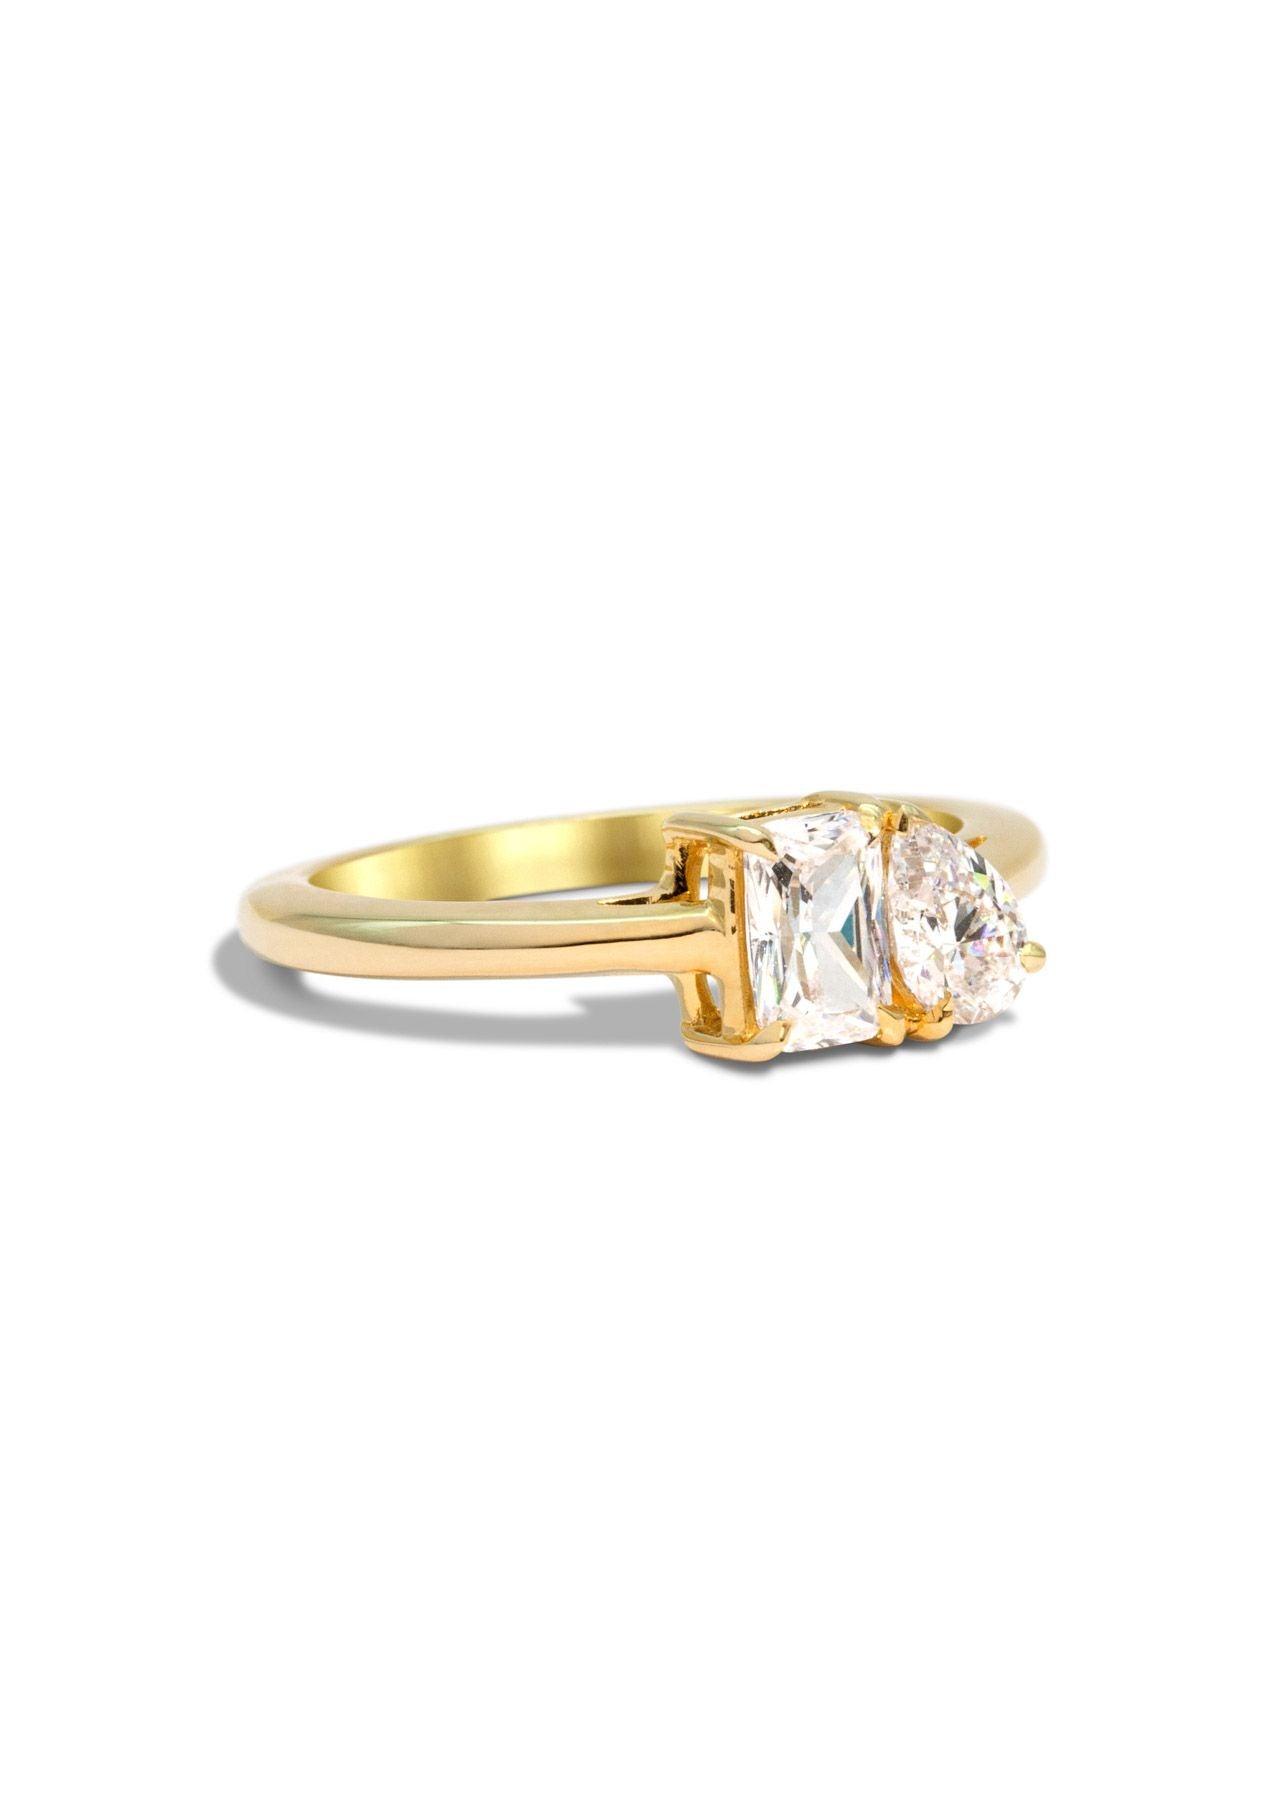 The Toi Et Moi Yellow Gold Cultured Diamond Ring - Molten Store